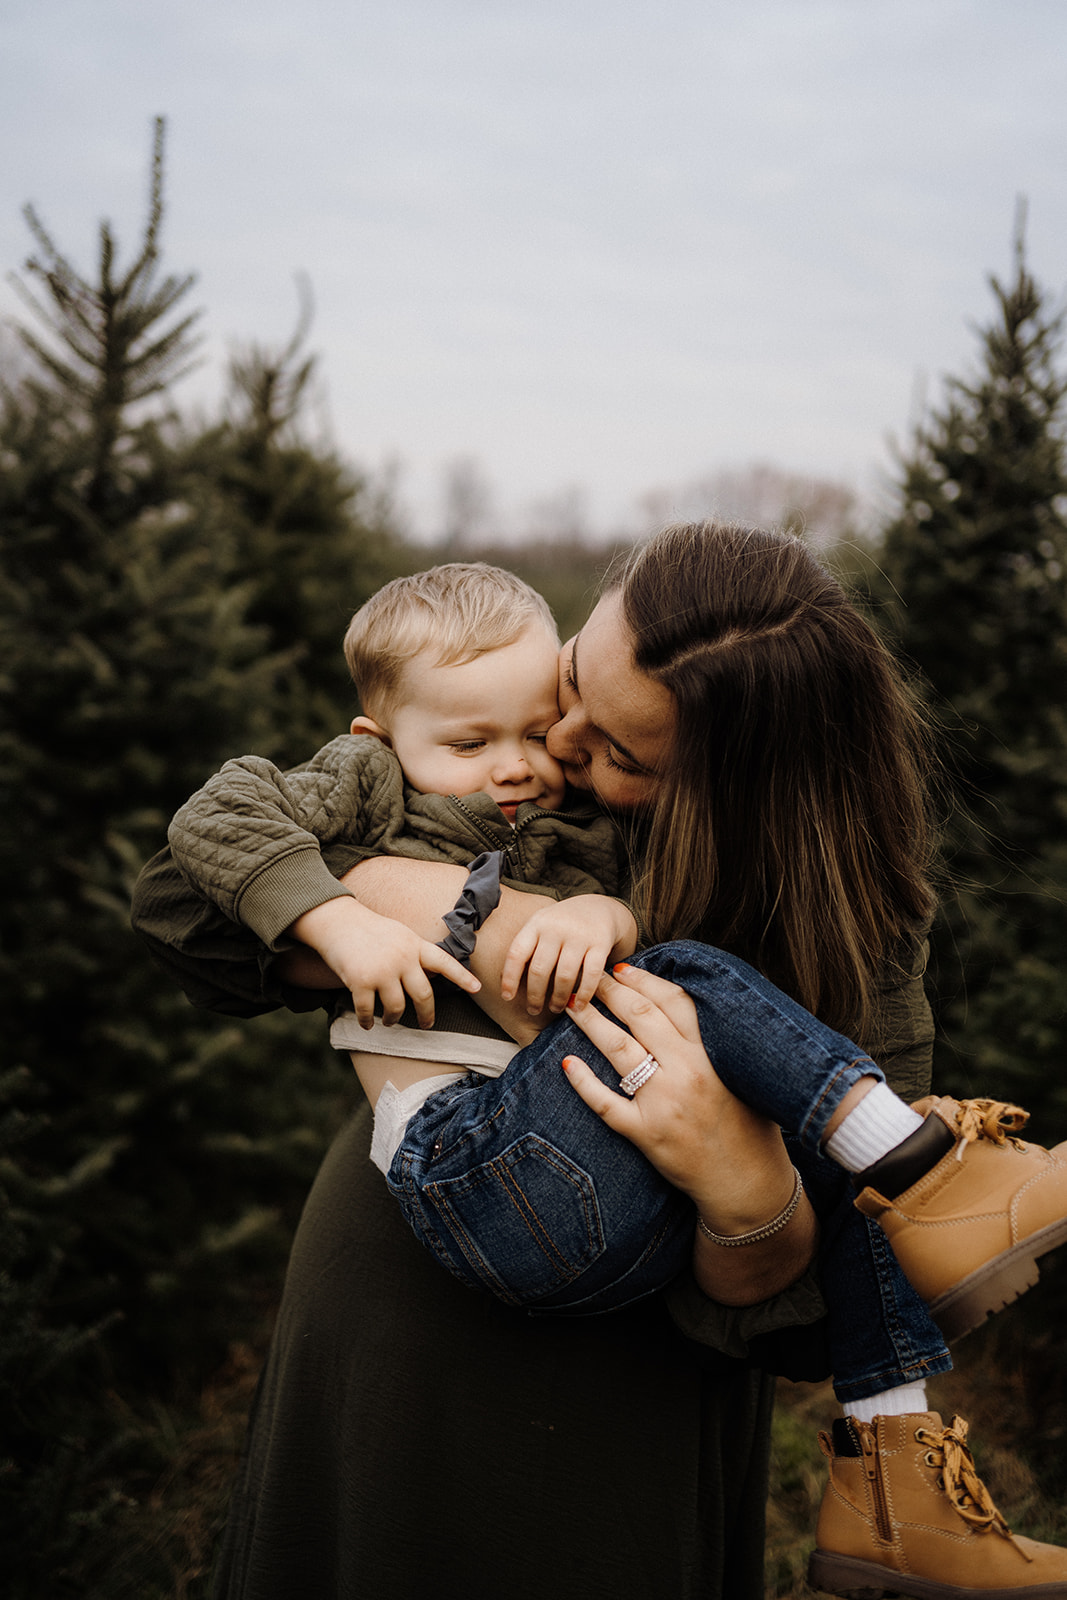 A mother kissing her son on the cheek in her arms outside between Christmas Trees.